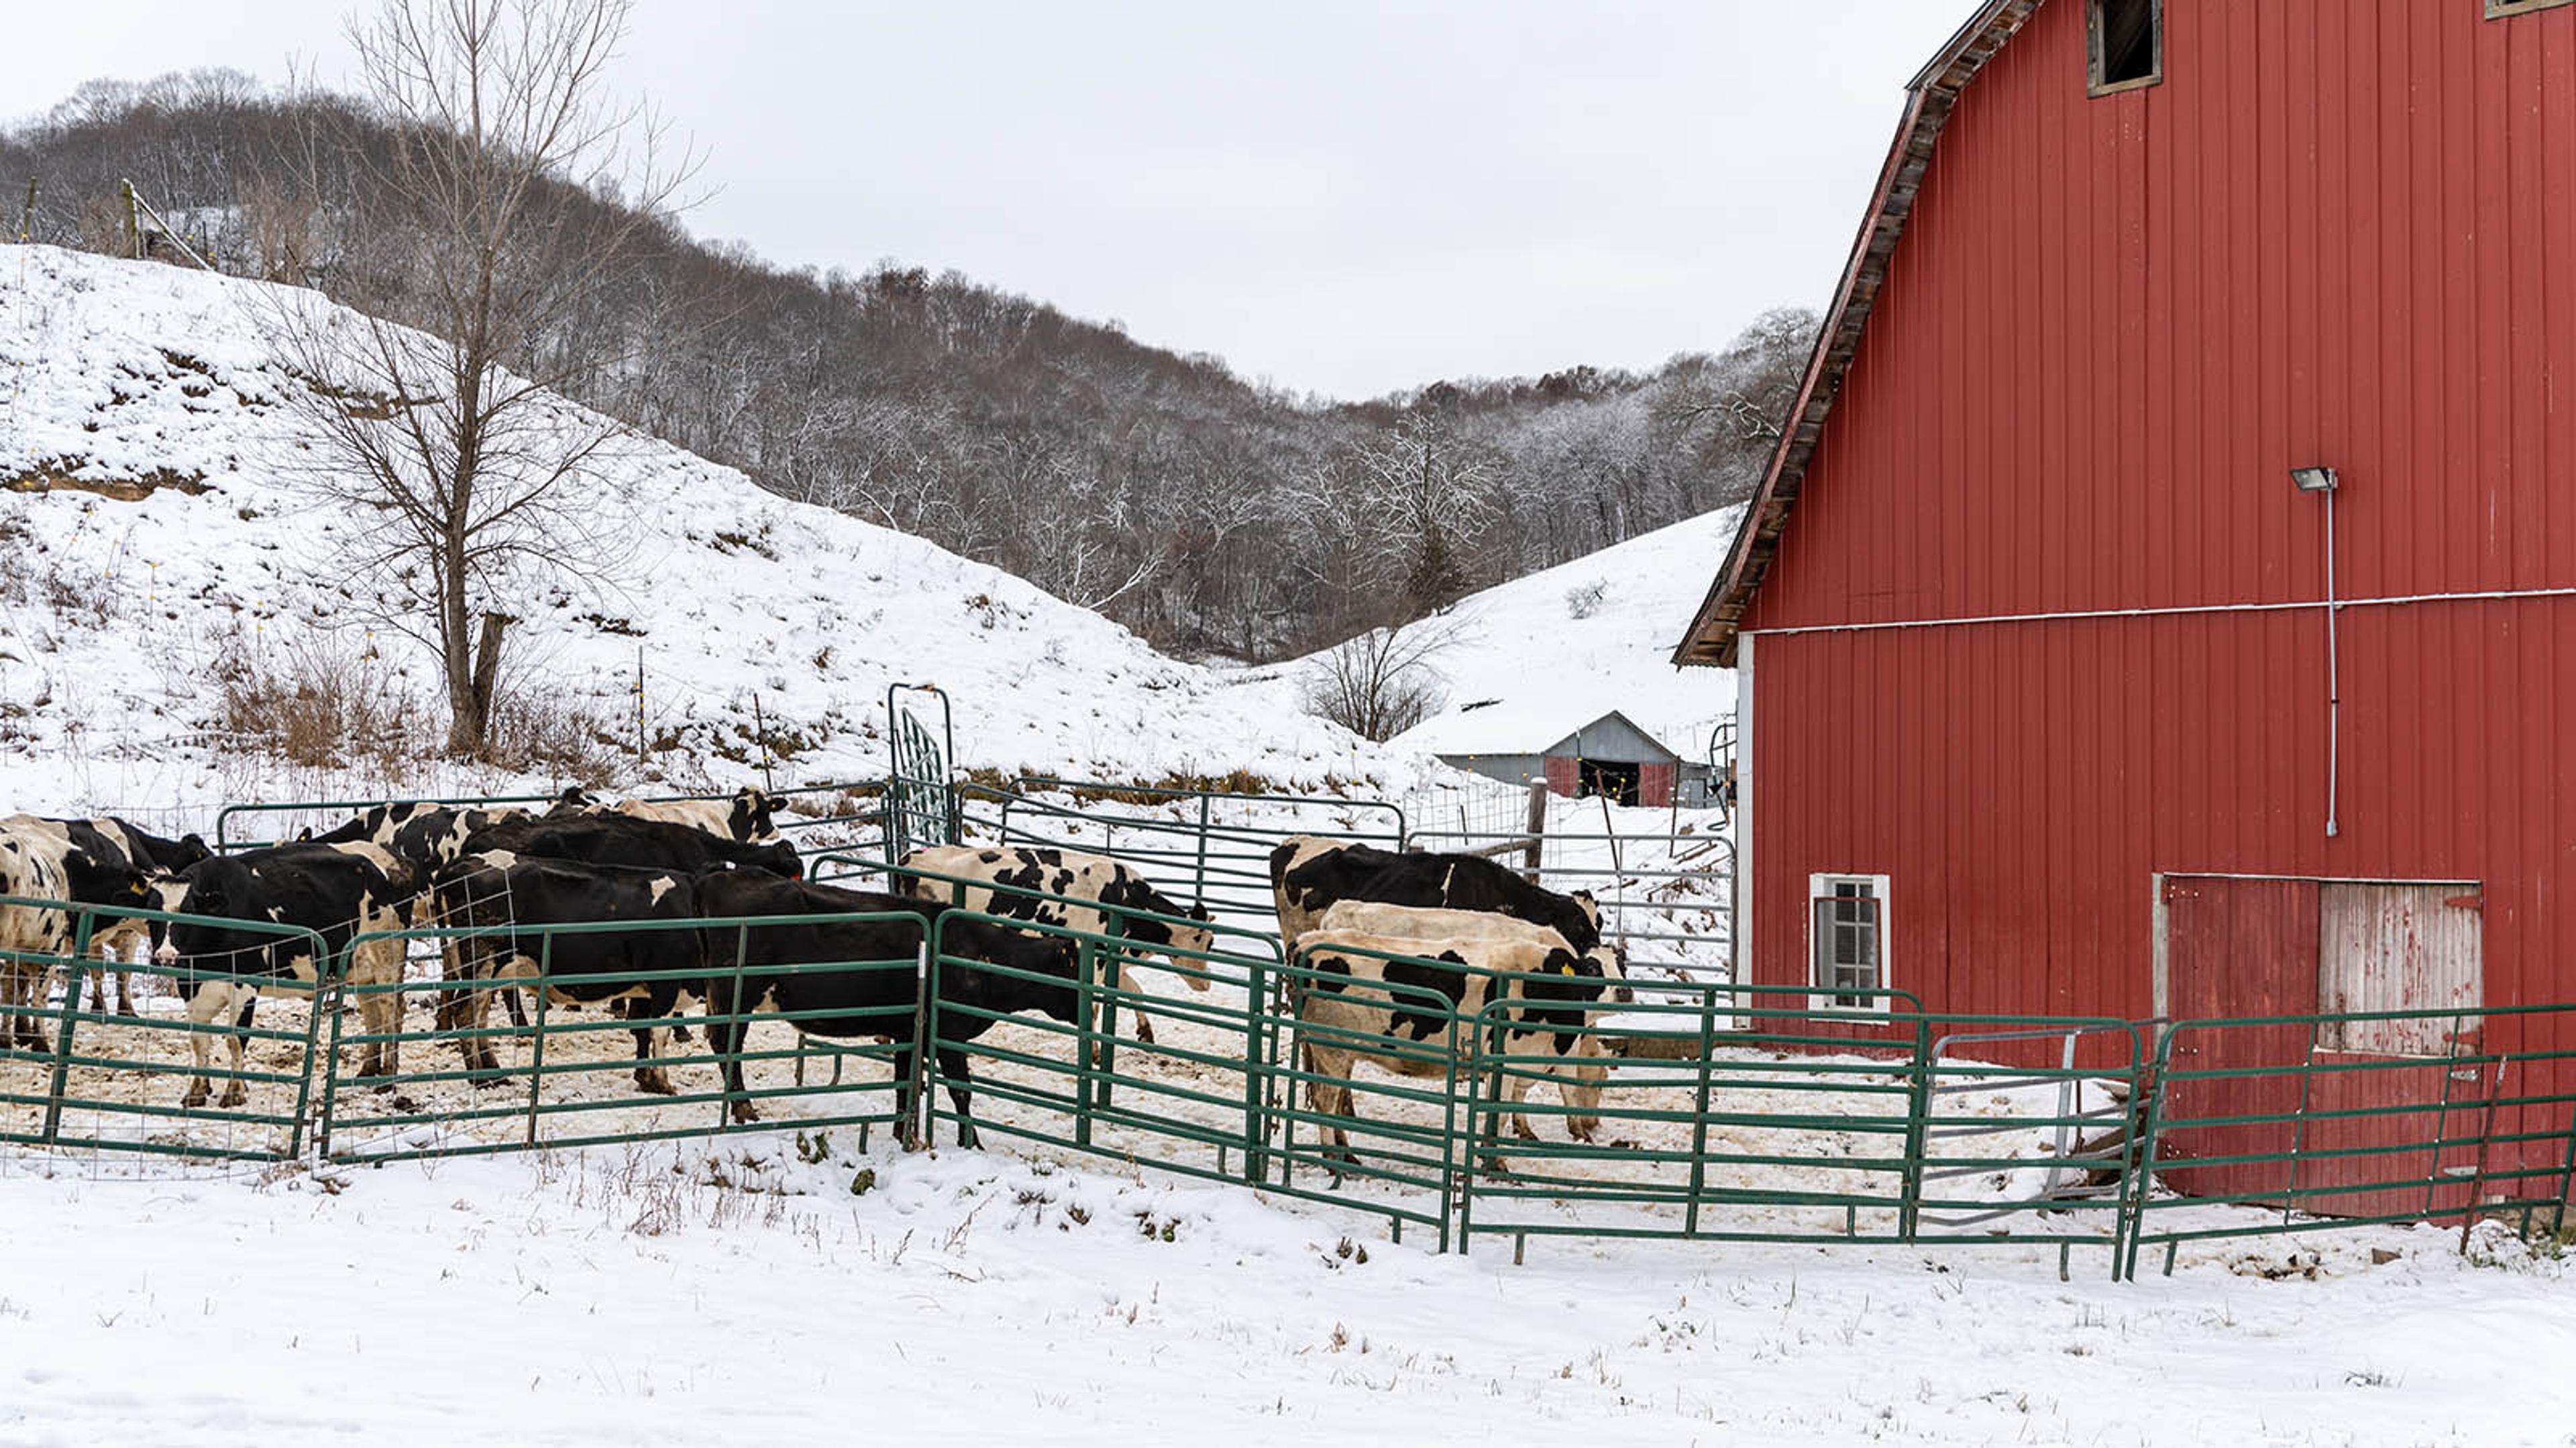 Cows get some fresh air in the winter paddock outside a red barn.